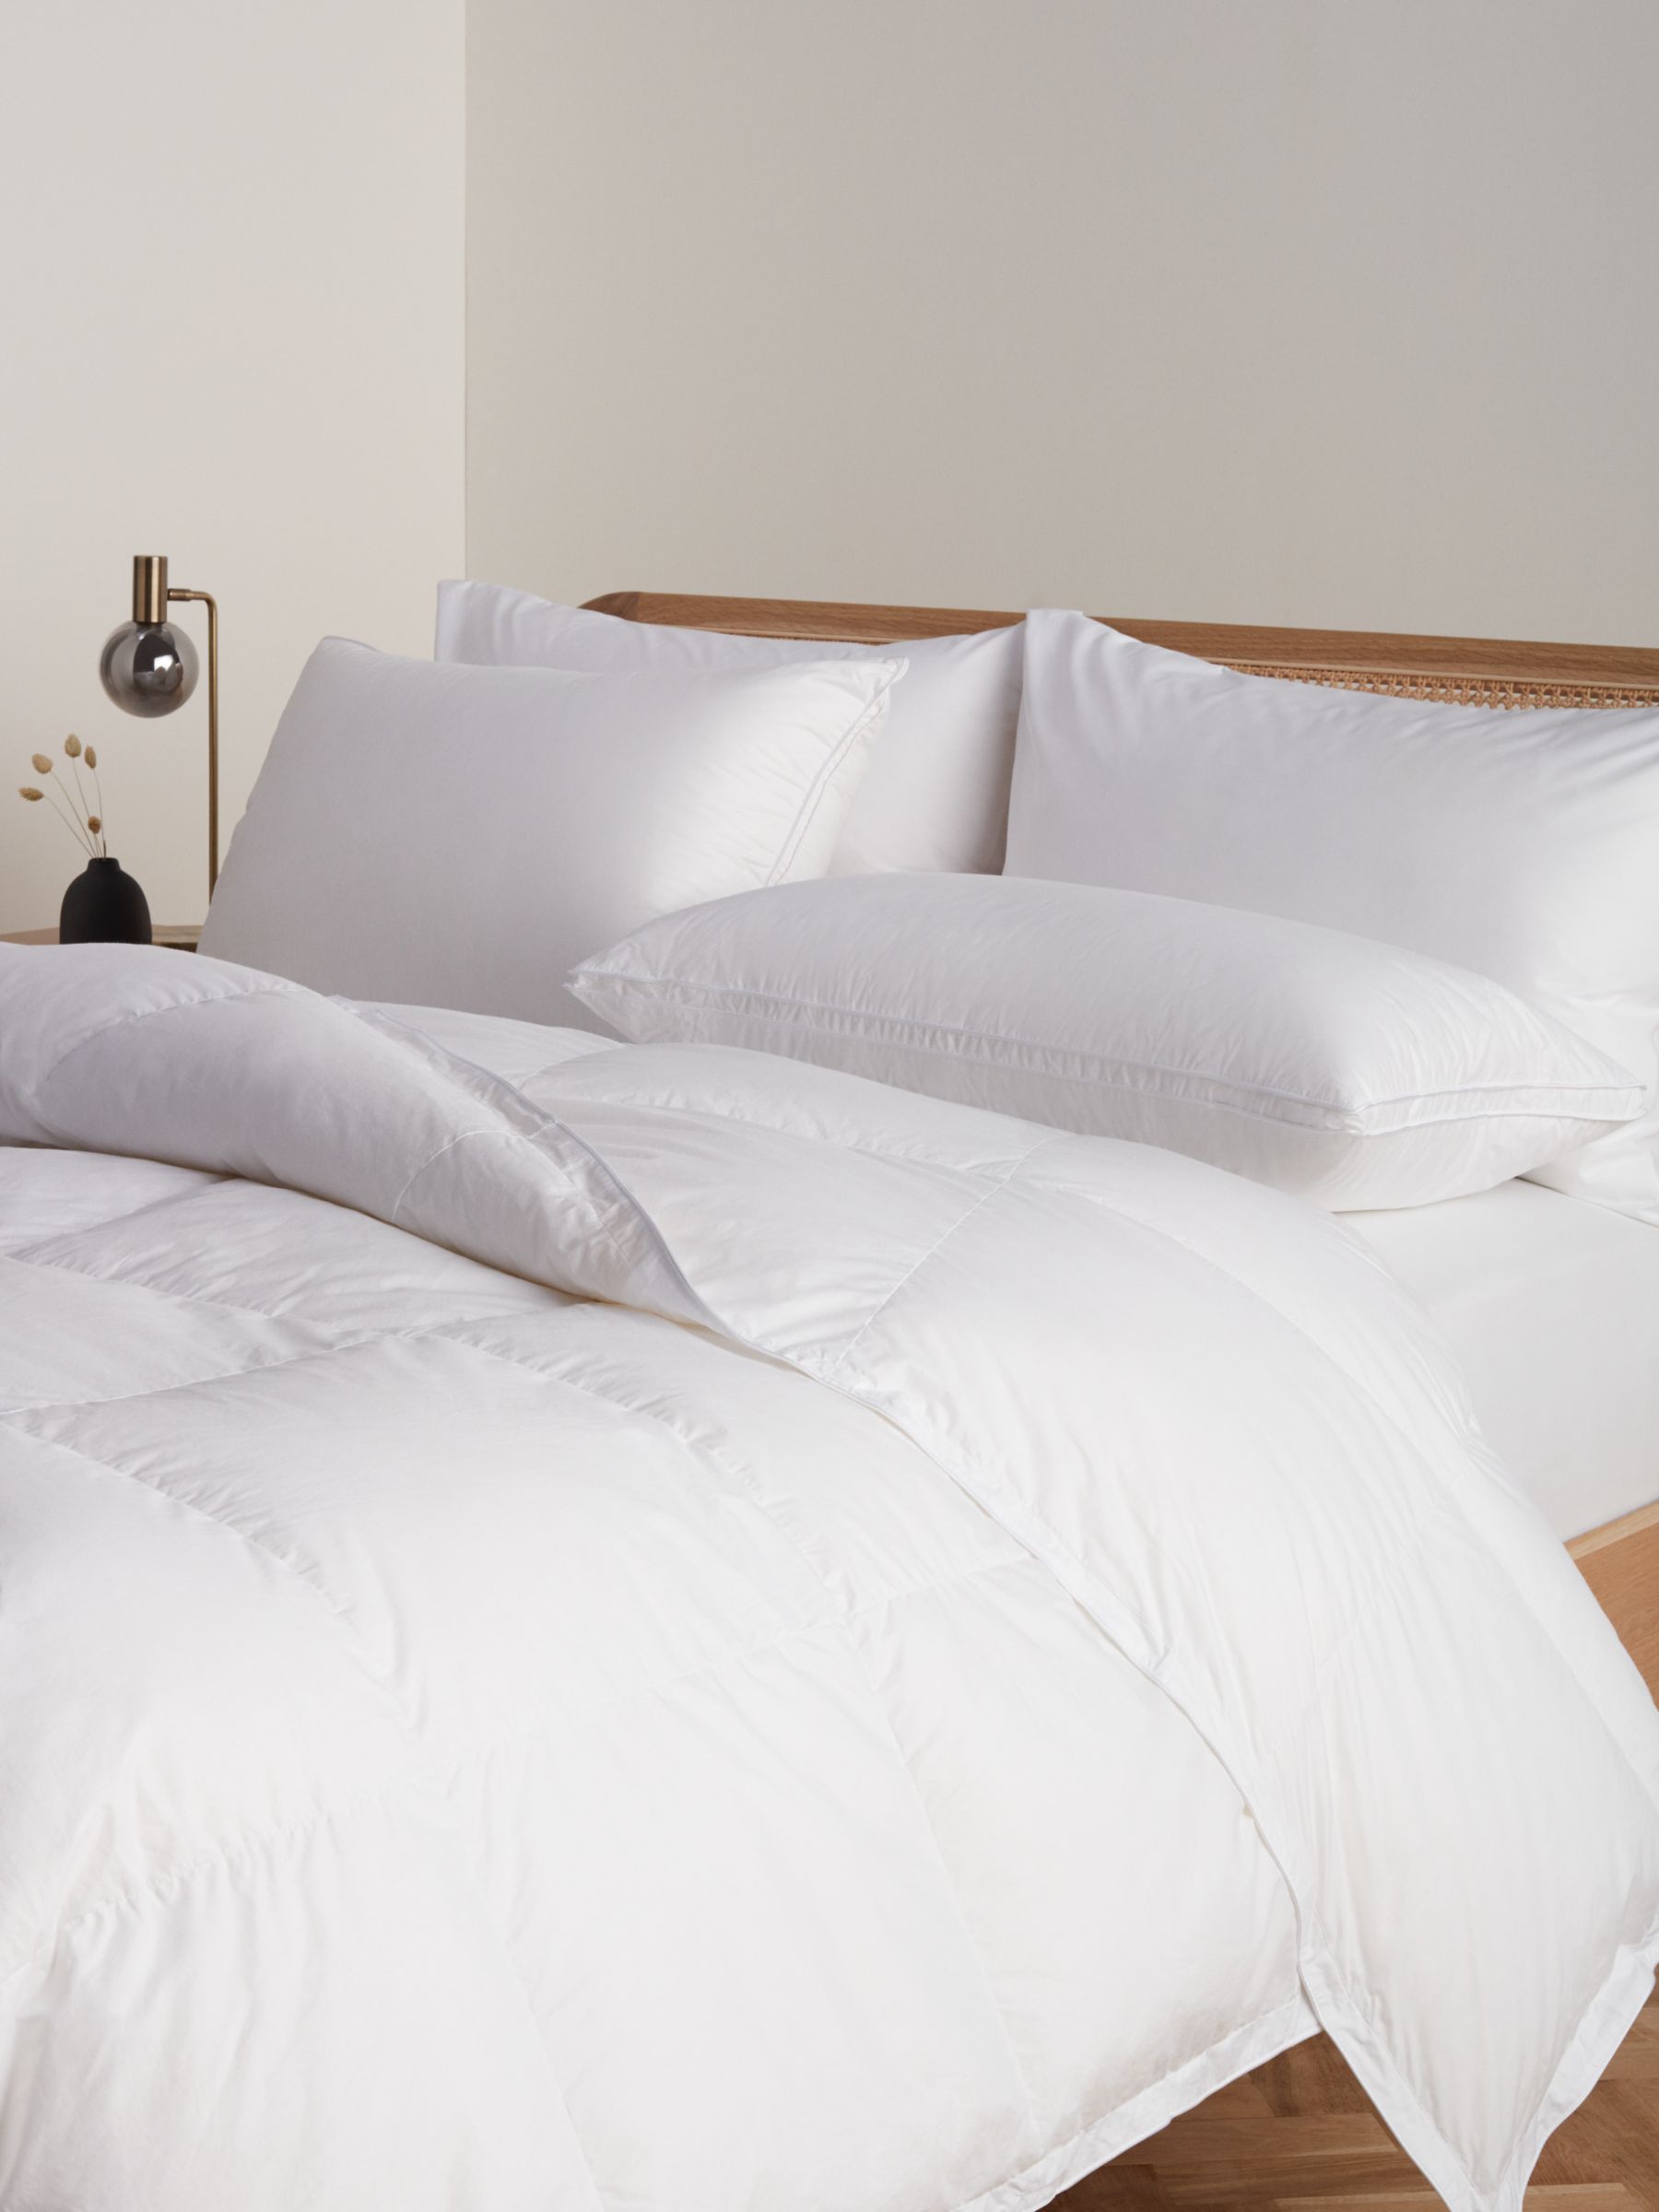 How To Choose The Right Duvet, How To Make Duvet Cover Stay In Place